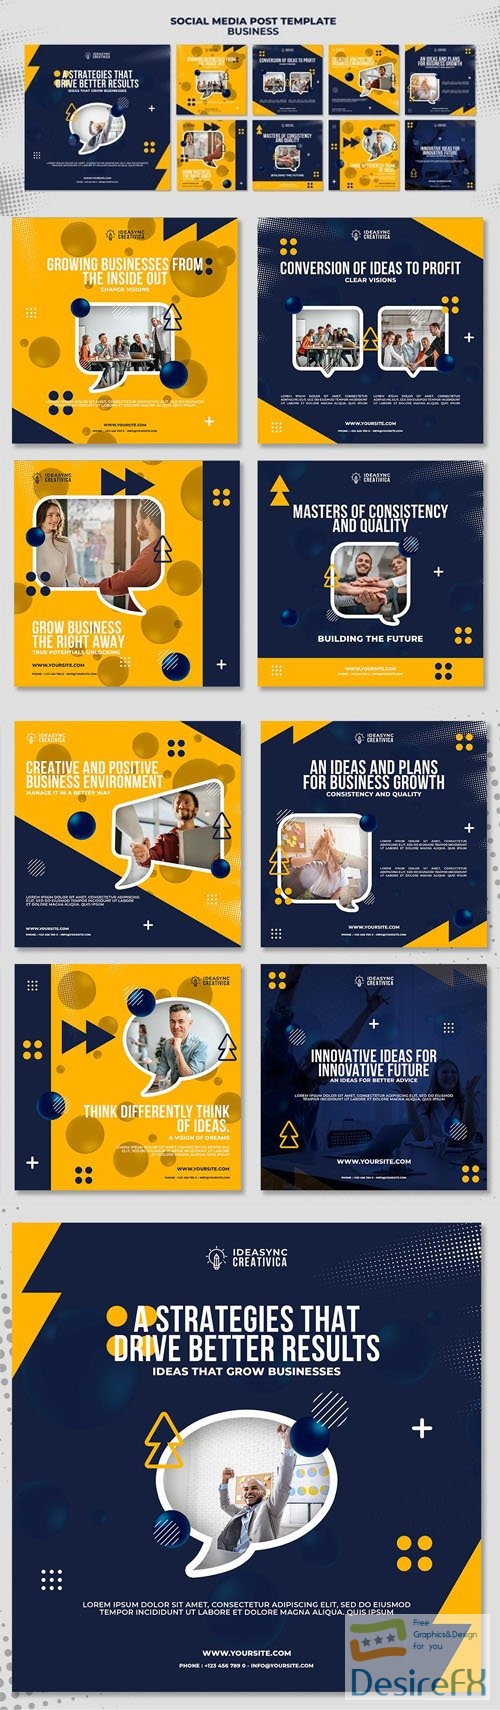 Business Instagram Posts PSD Templates Collection